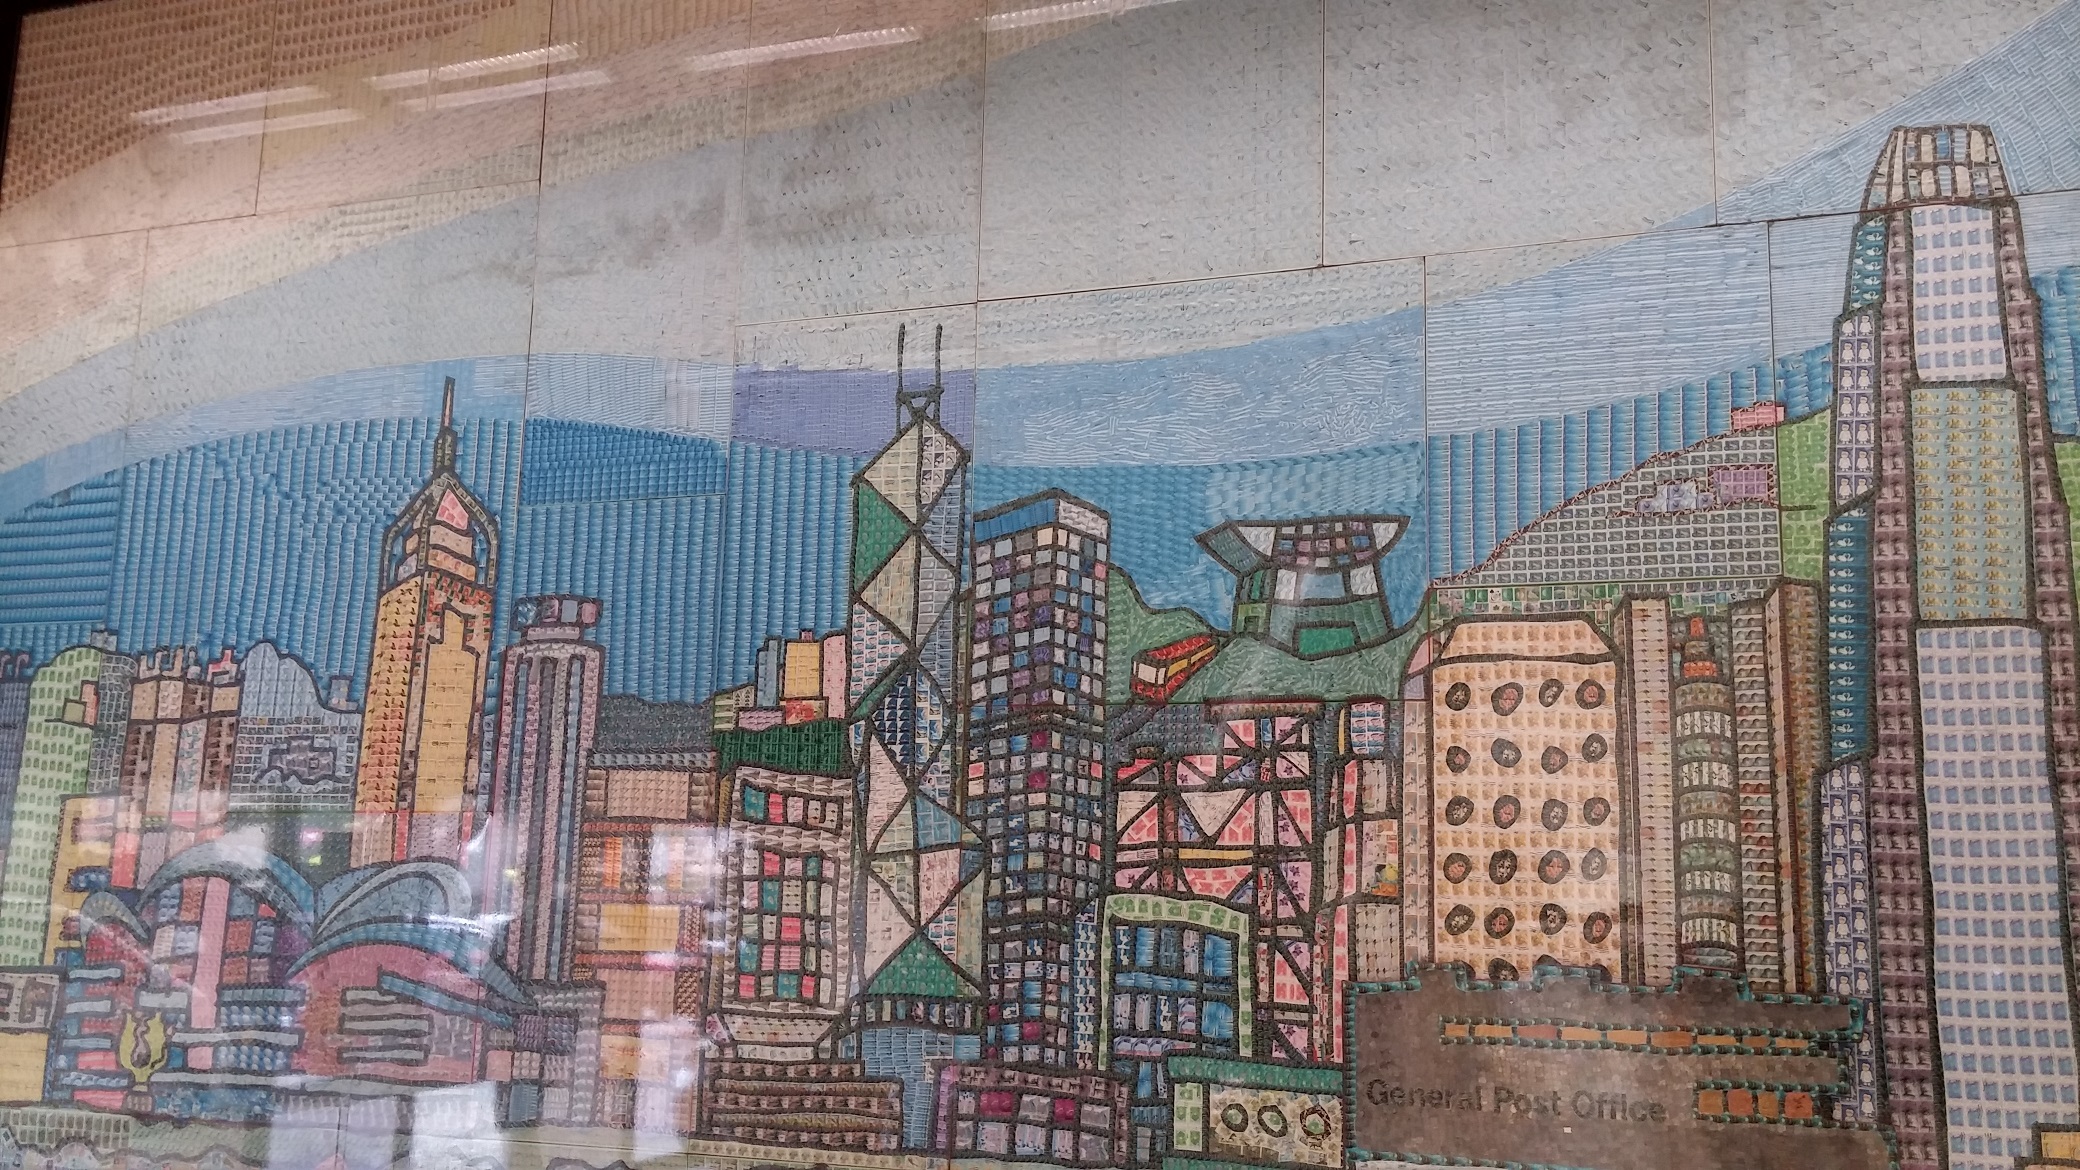 Stamp mosaic shows Hong Kong amazing view in General Post Office